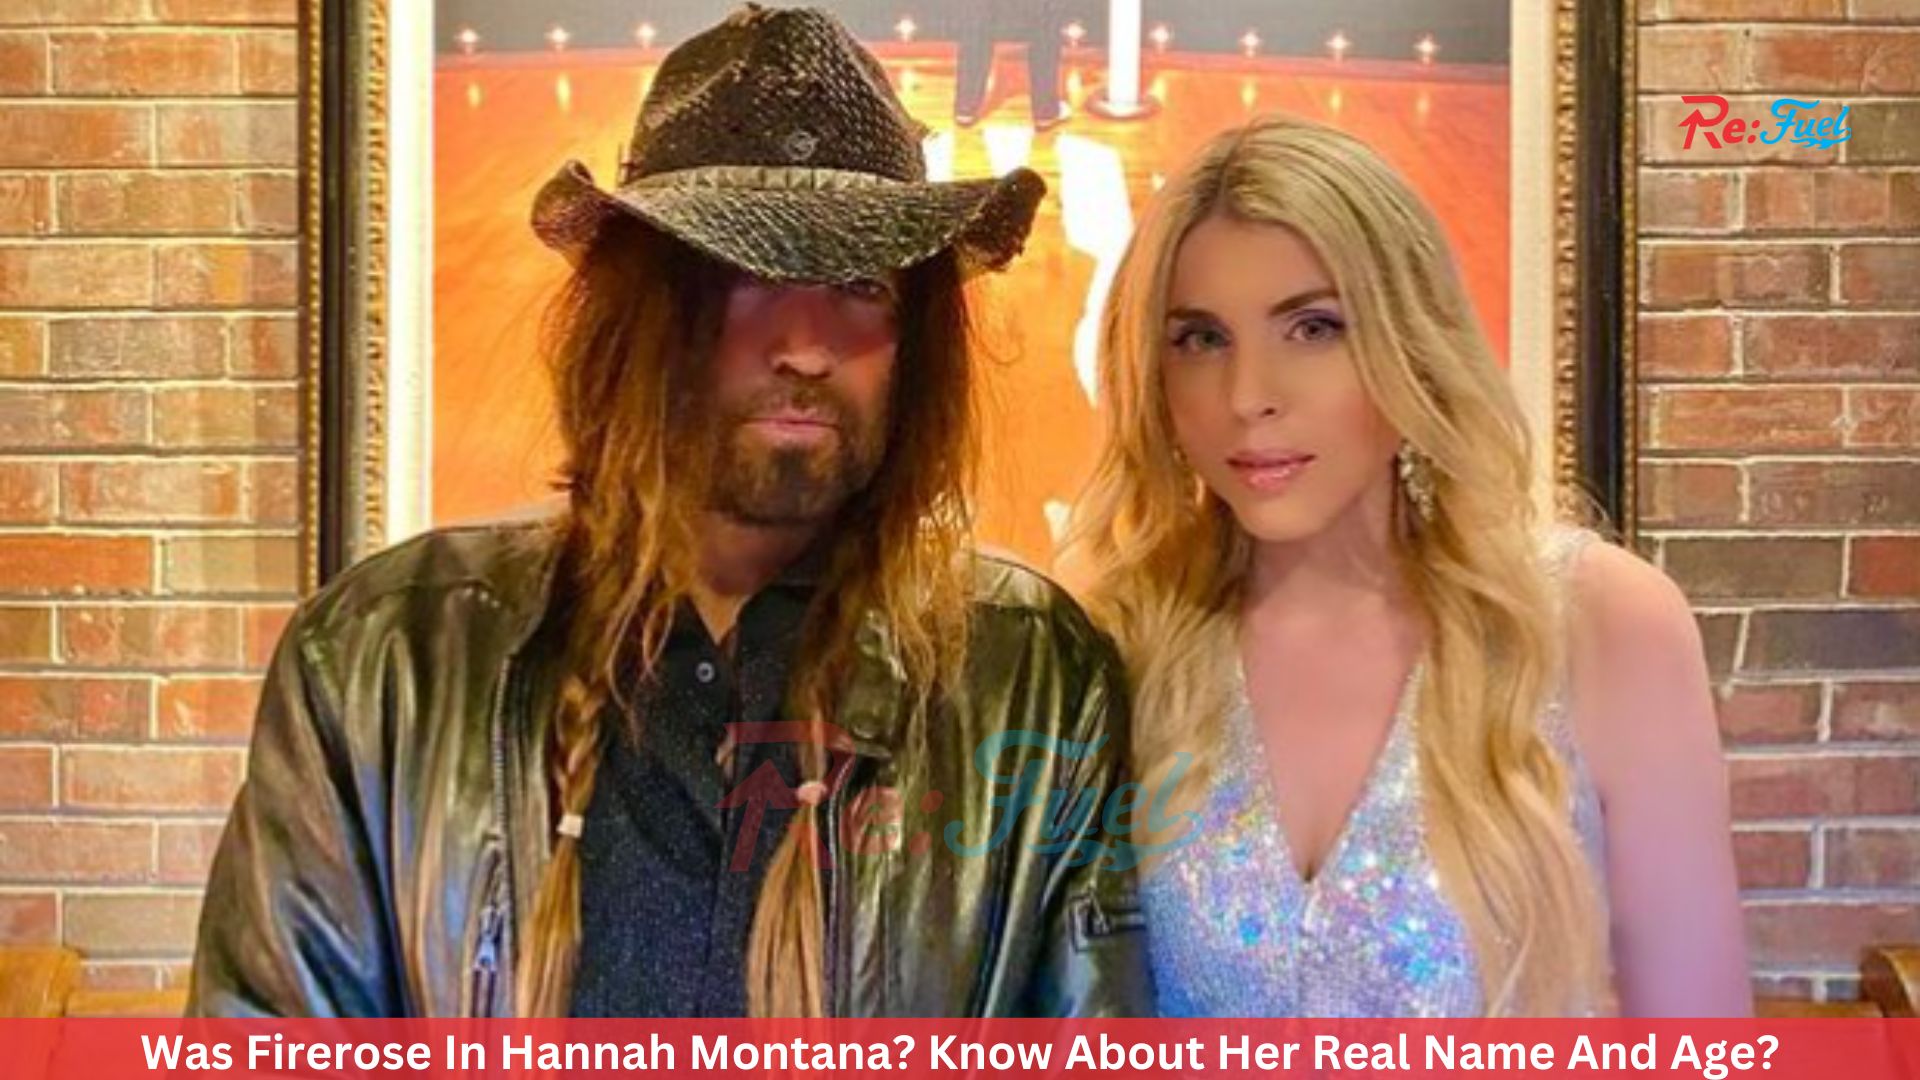 Was Firerose In Hannah Montana? Know About Her Real Name And Age?